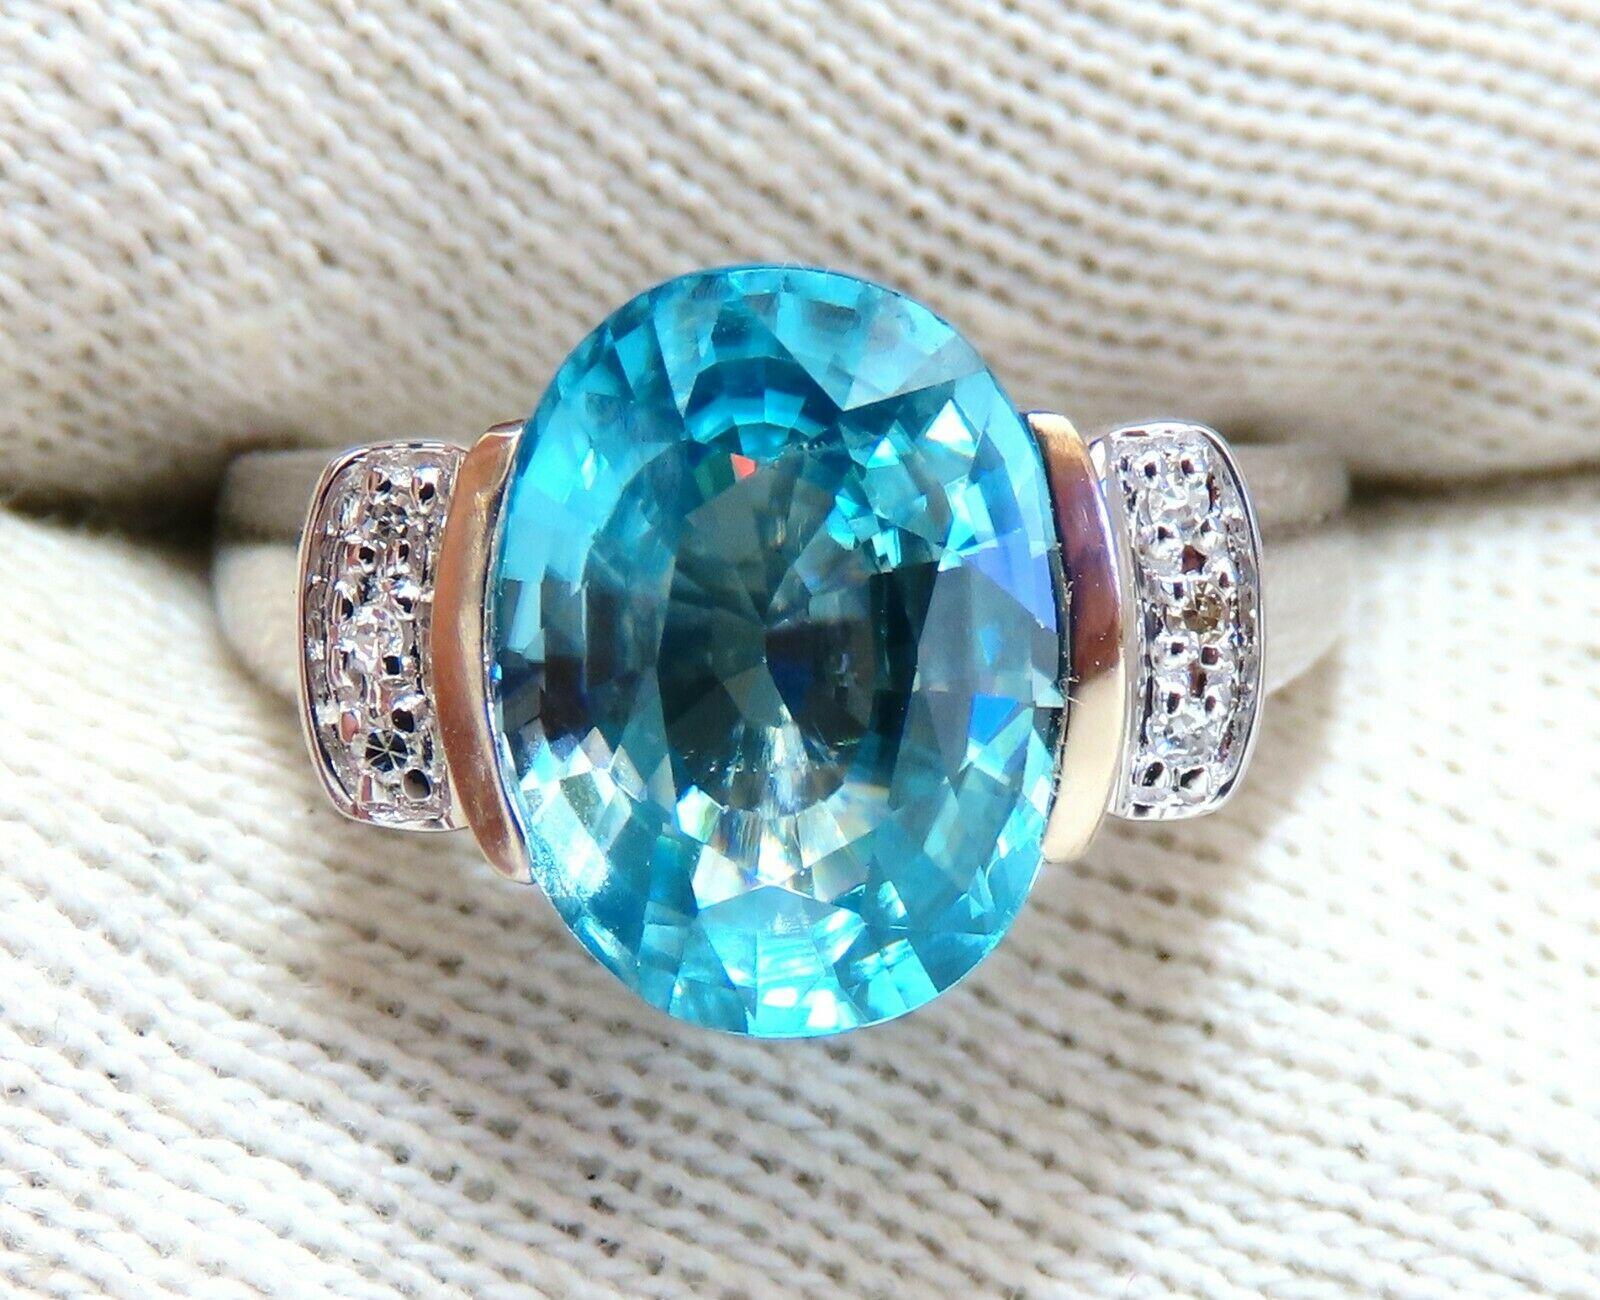 Indigo Blue Natural Zircon Ring

5.65ct. Natural Blue Zircon

Oval cut 11.8 X 8.1mm

 VS Clean Clarity, Transparent

.10ct Side Full cut natural baguette diamonds

 H-colors & Vs-2 clarity

  14kt. white gold

3.9 grams

Ring Current size: